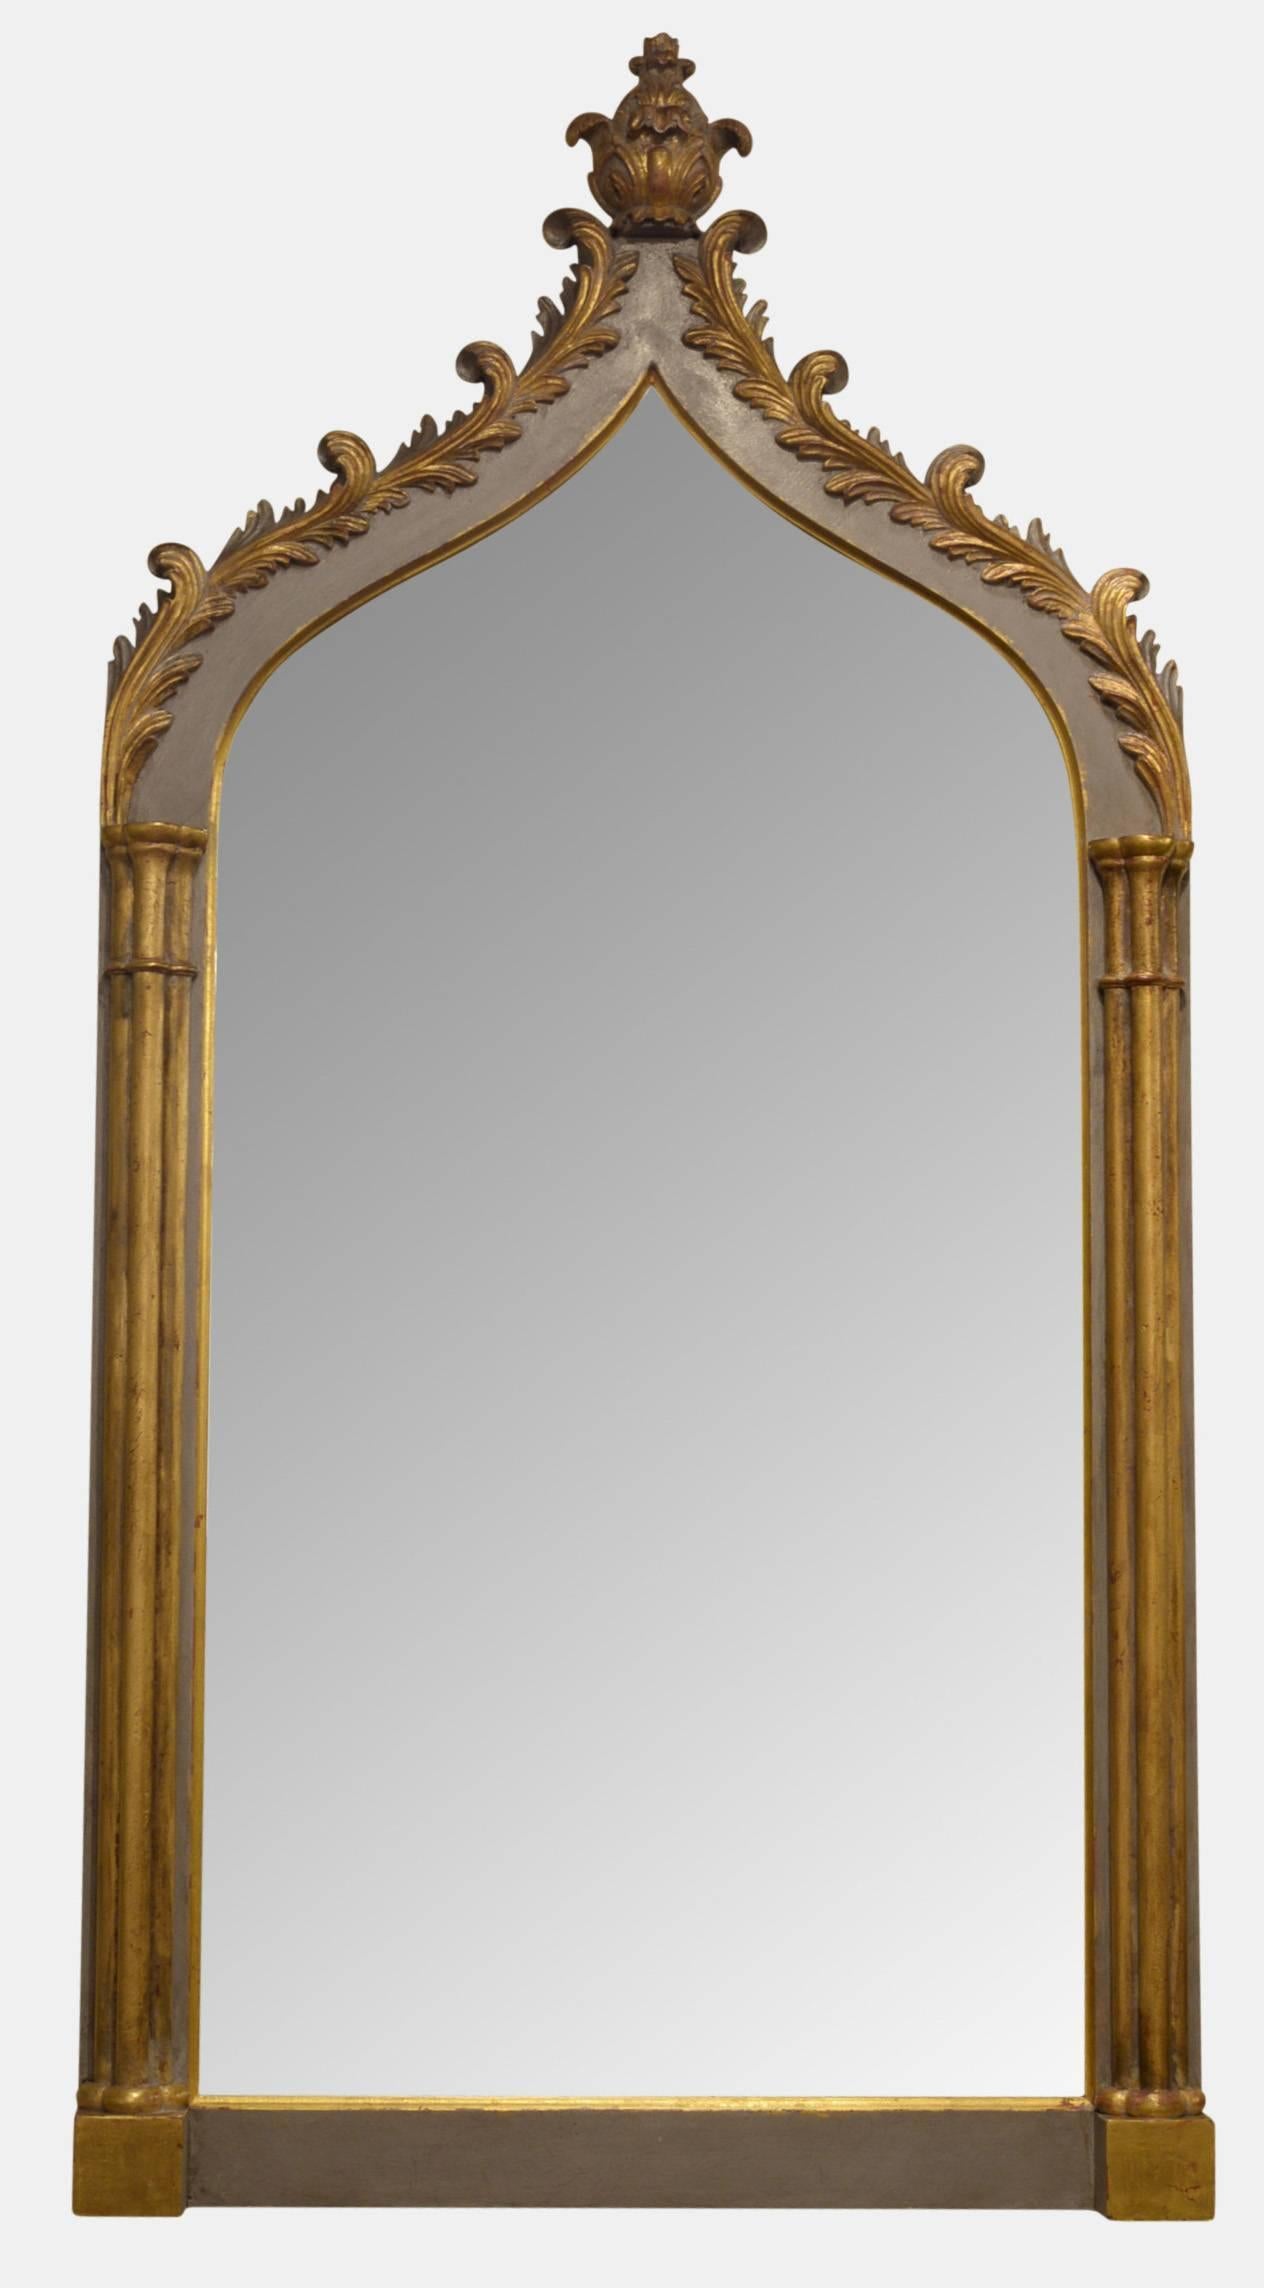 Pair of carved wood and parcel-gilt Gothic Revival mirrors,

20th century.

Measures: 121cm (47.6